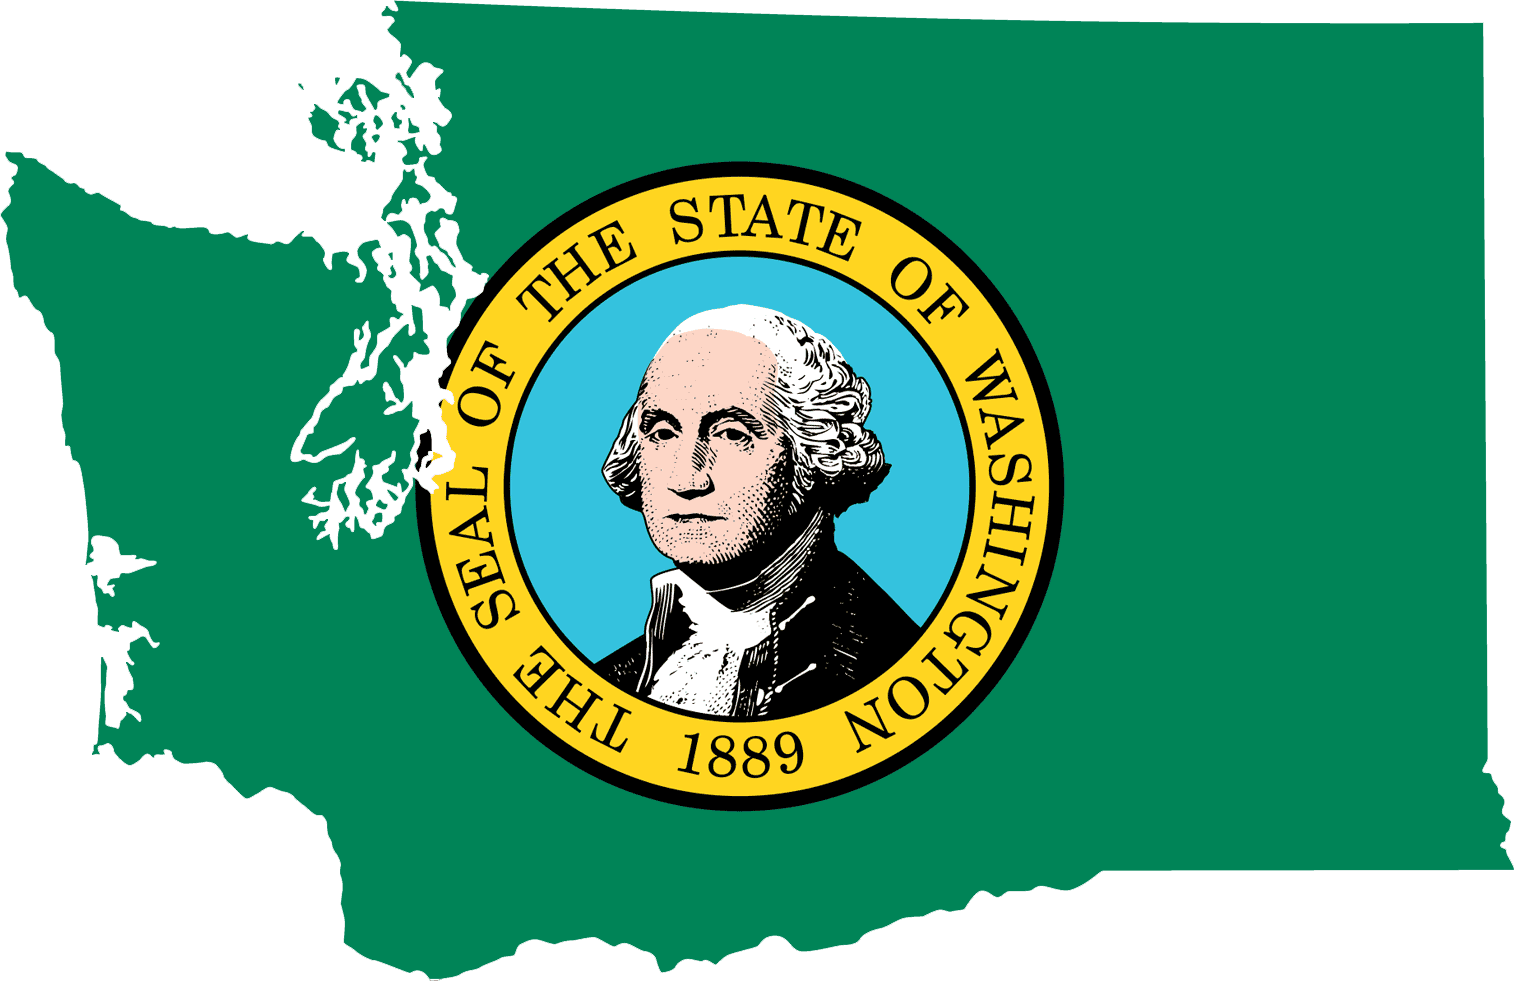 Washington State Firearms Freedom Act Returning in January